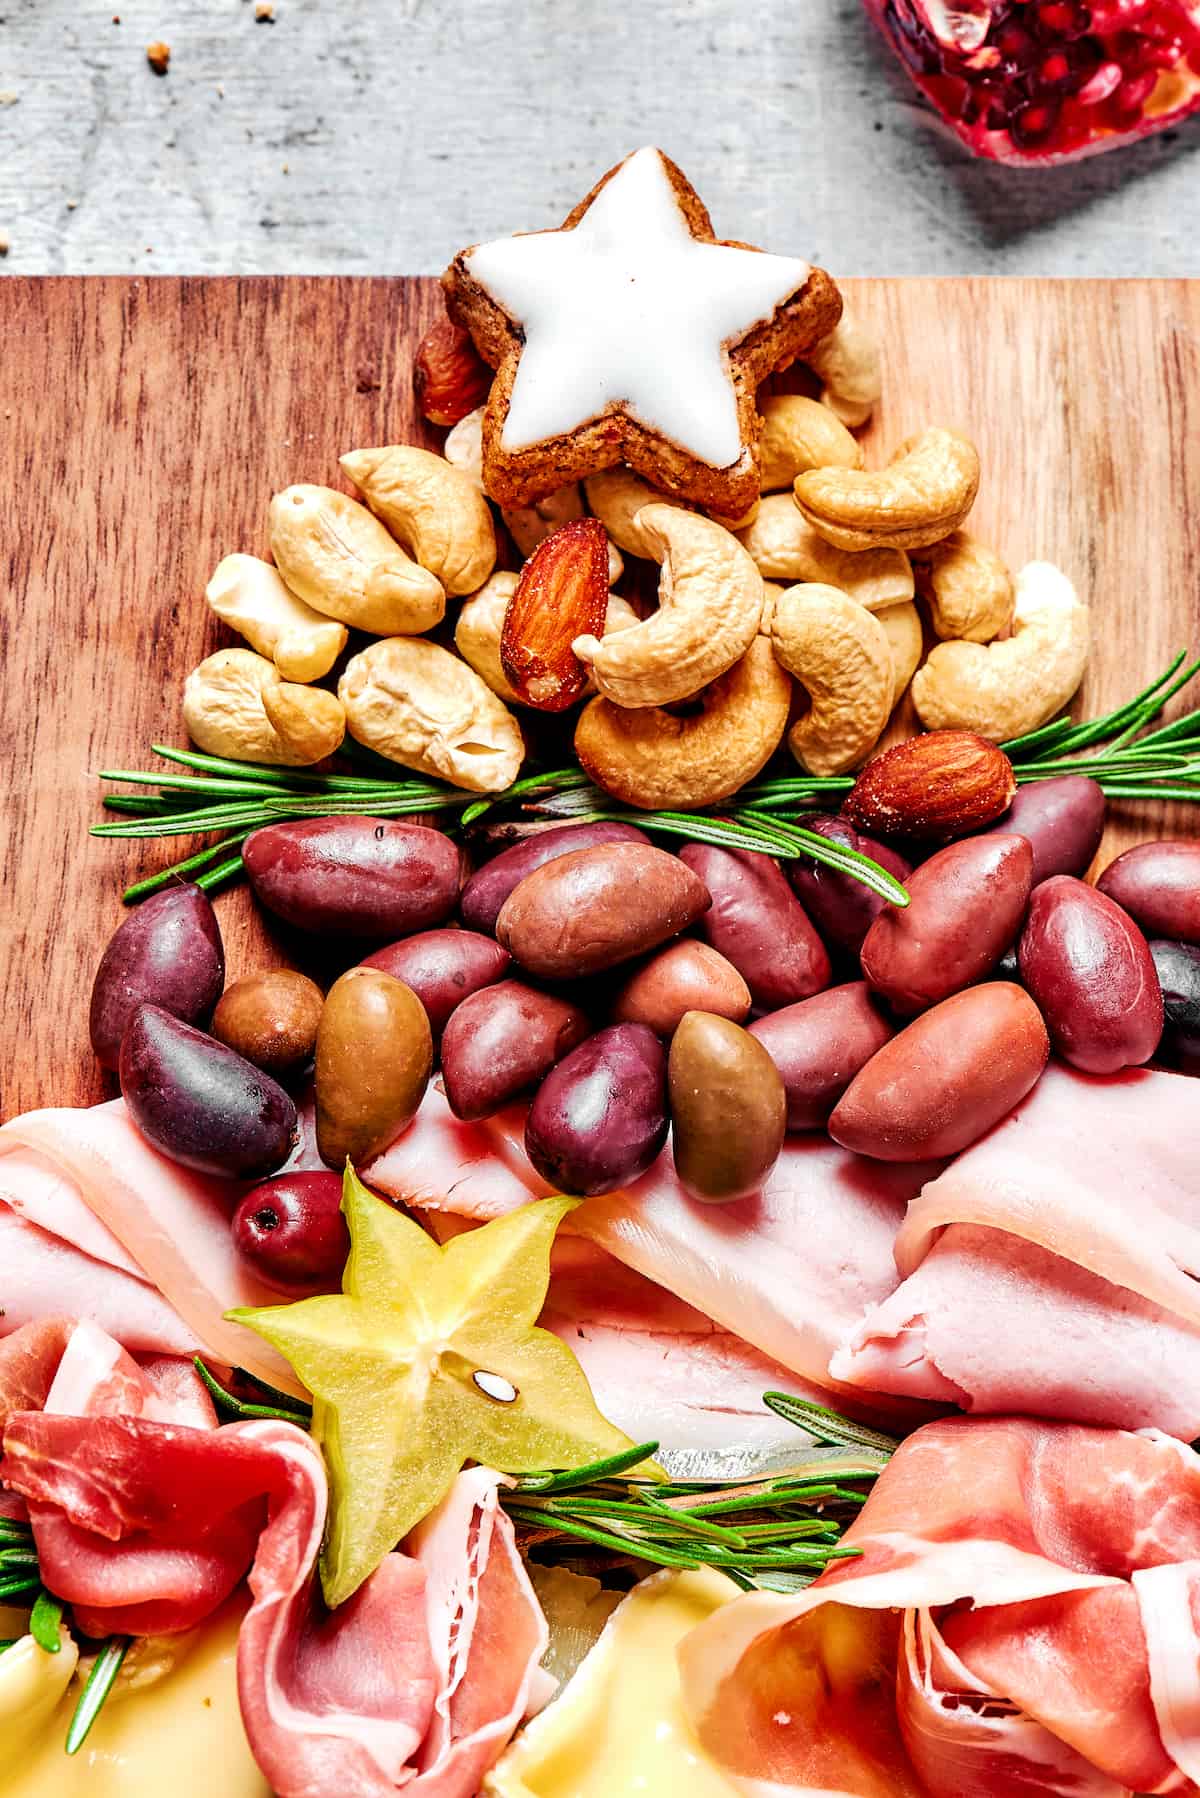 A cheese star, nuts, rosemary, olives, and ham on cutting board